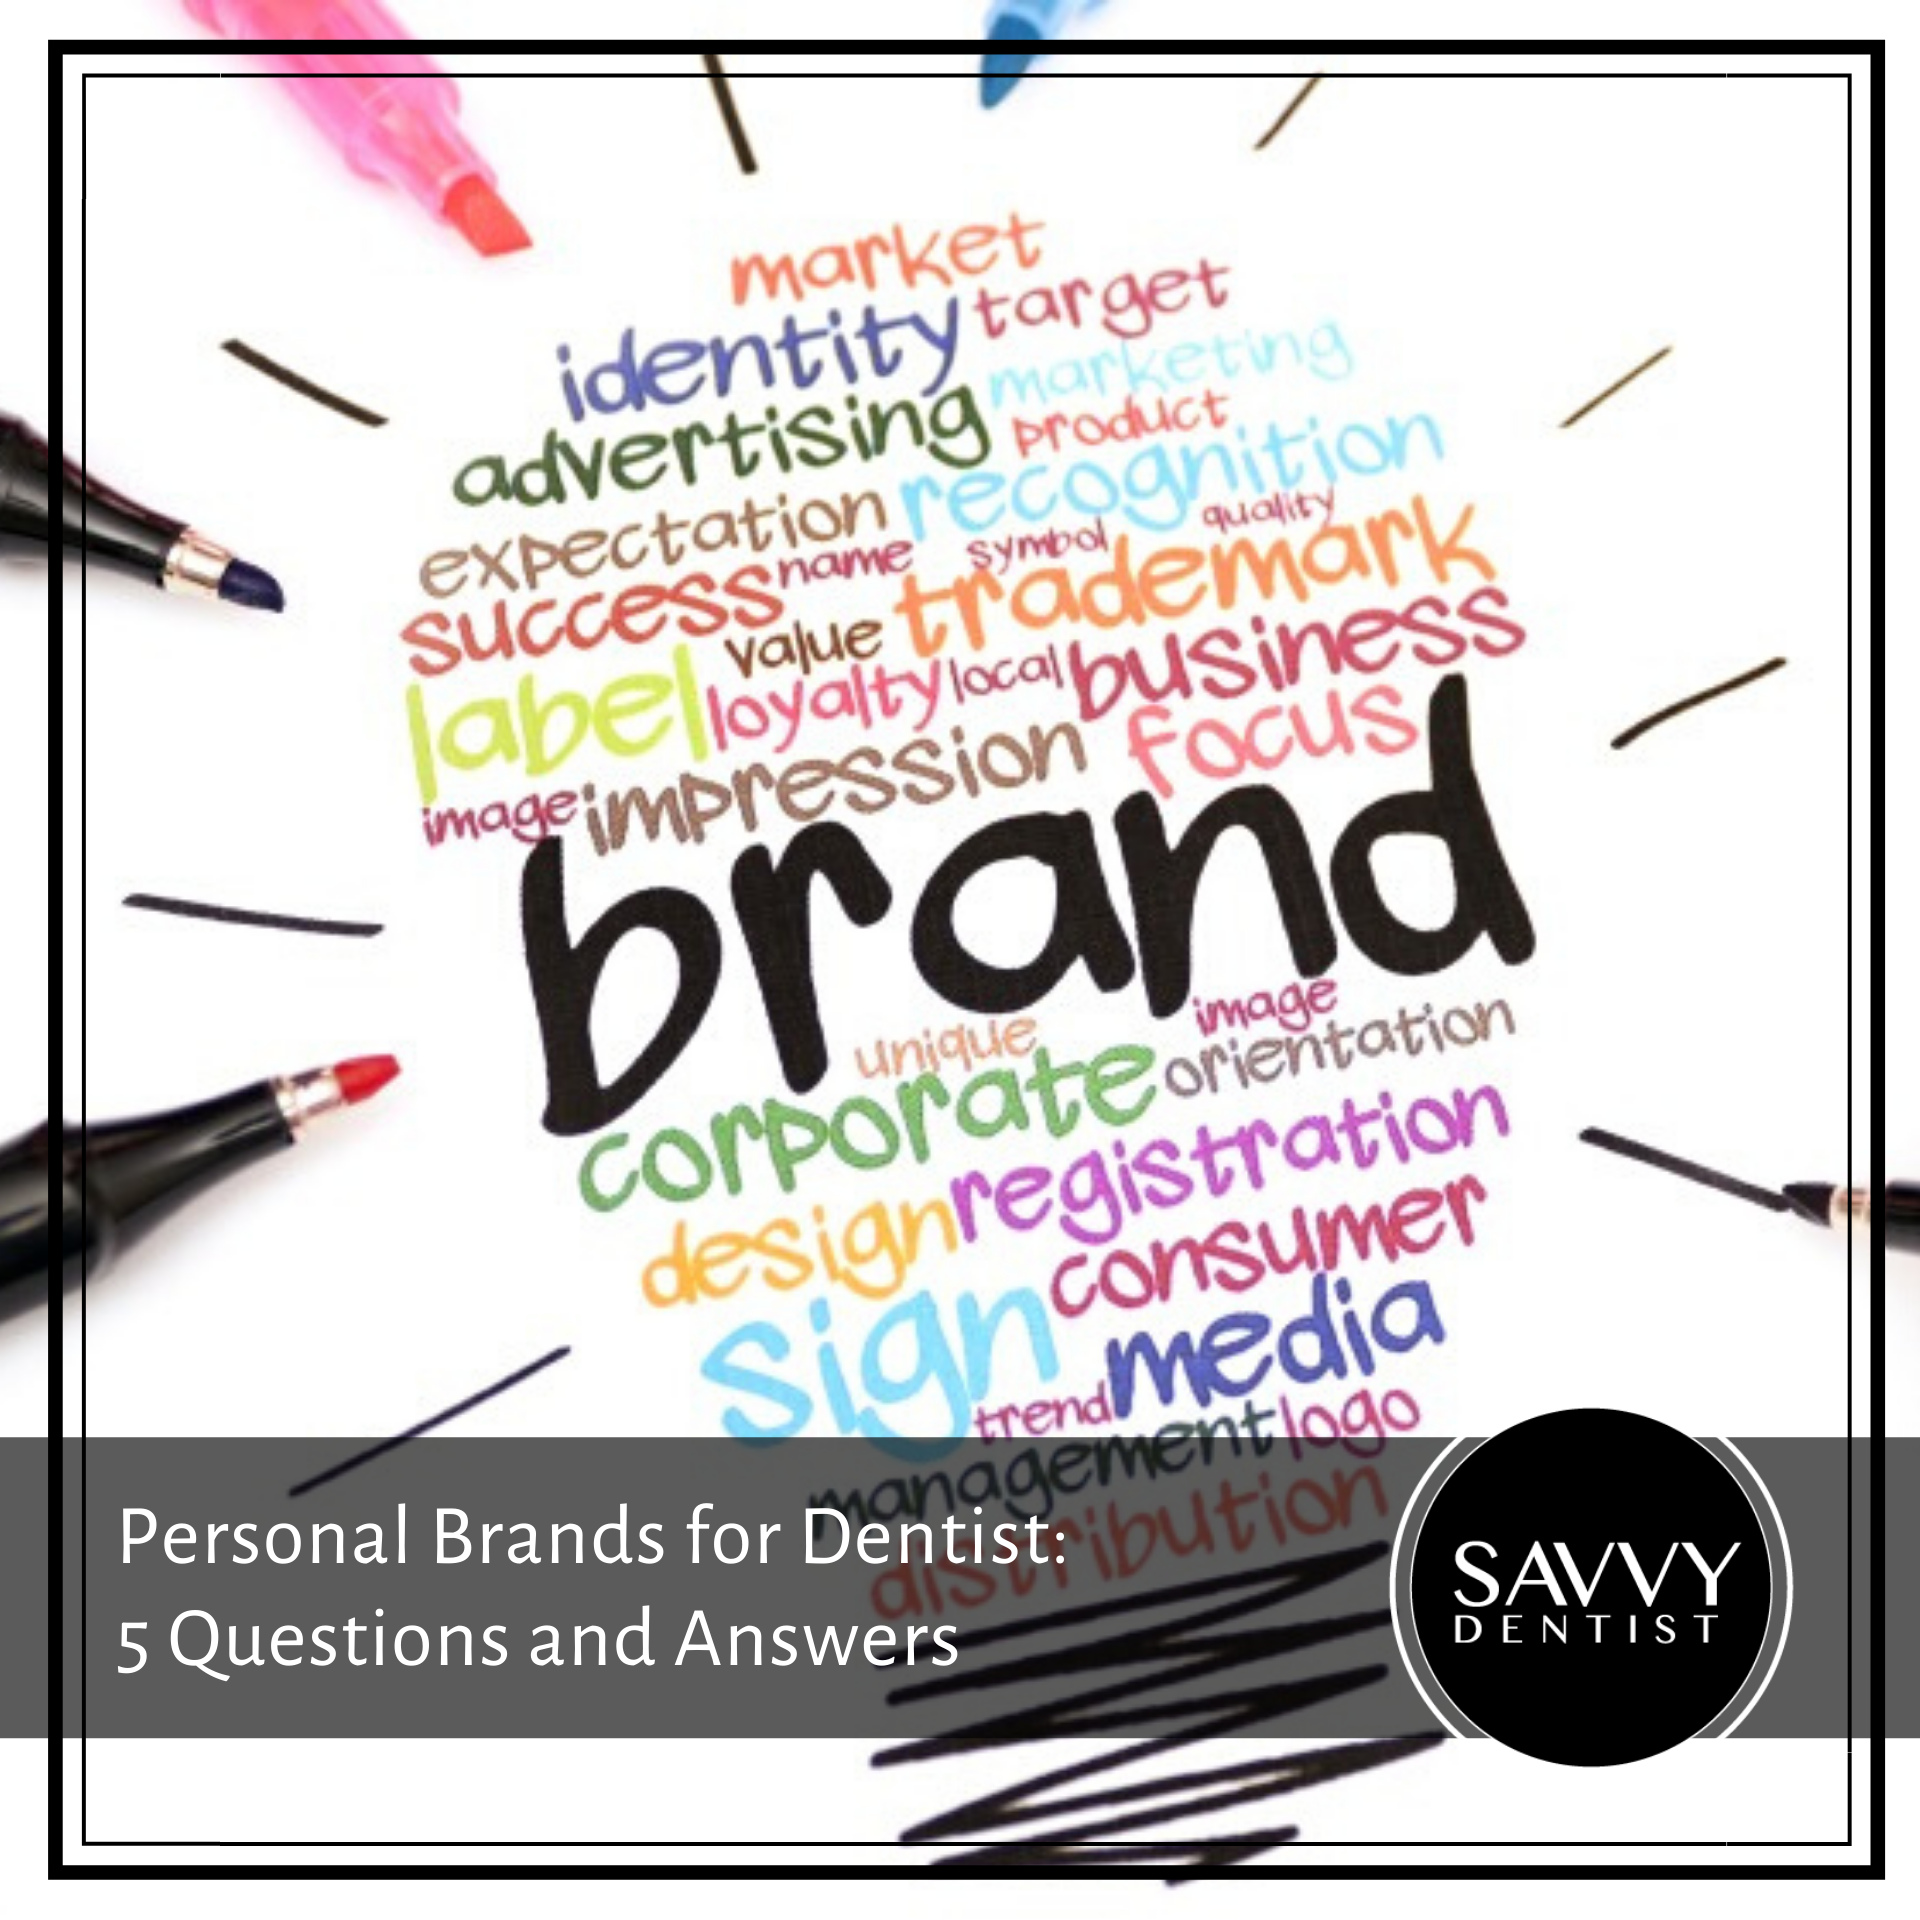 Personal Brands for Dentists: 5 Questions and Answers